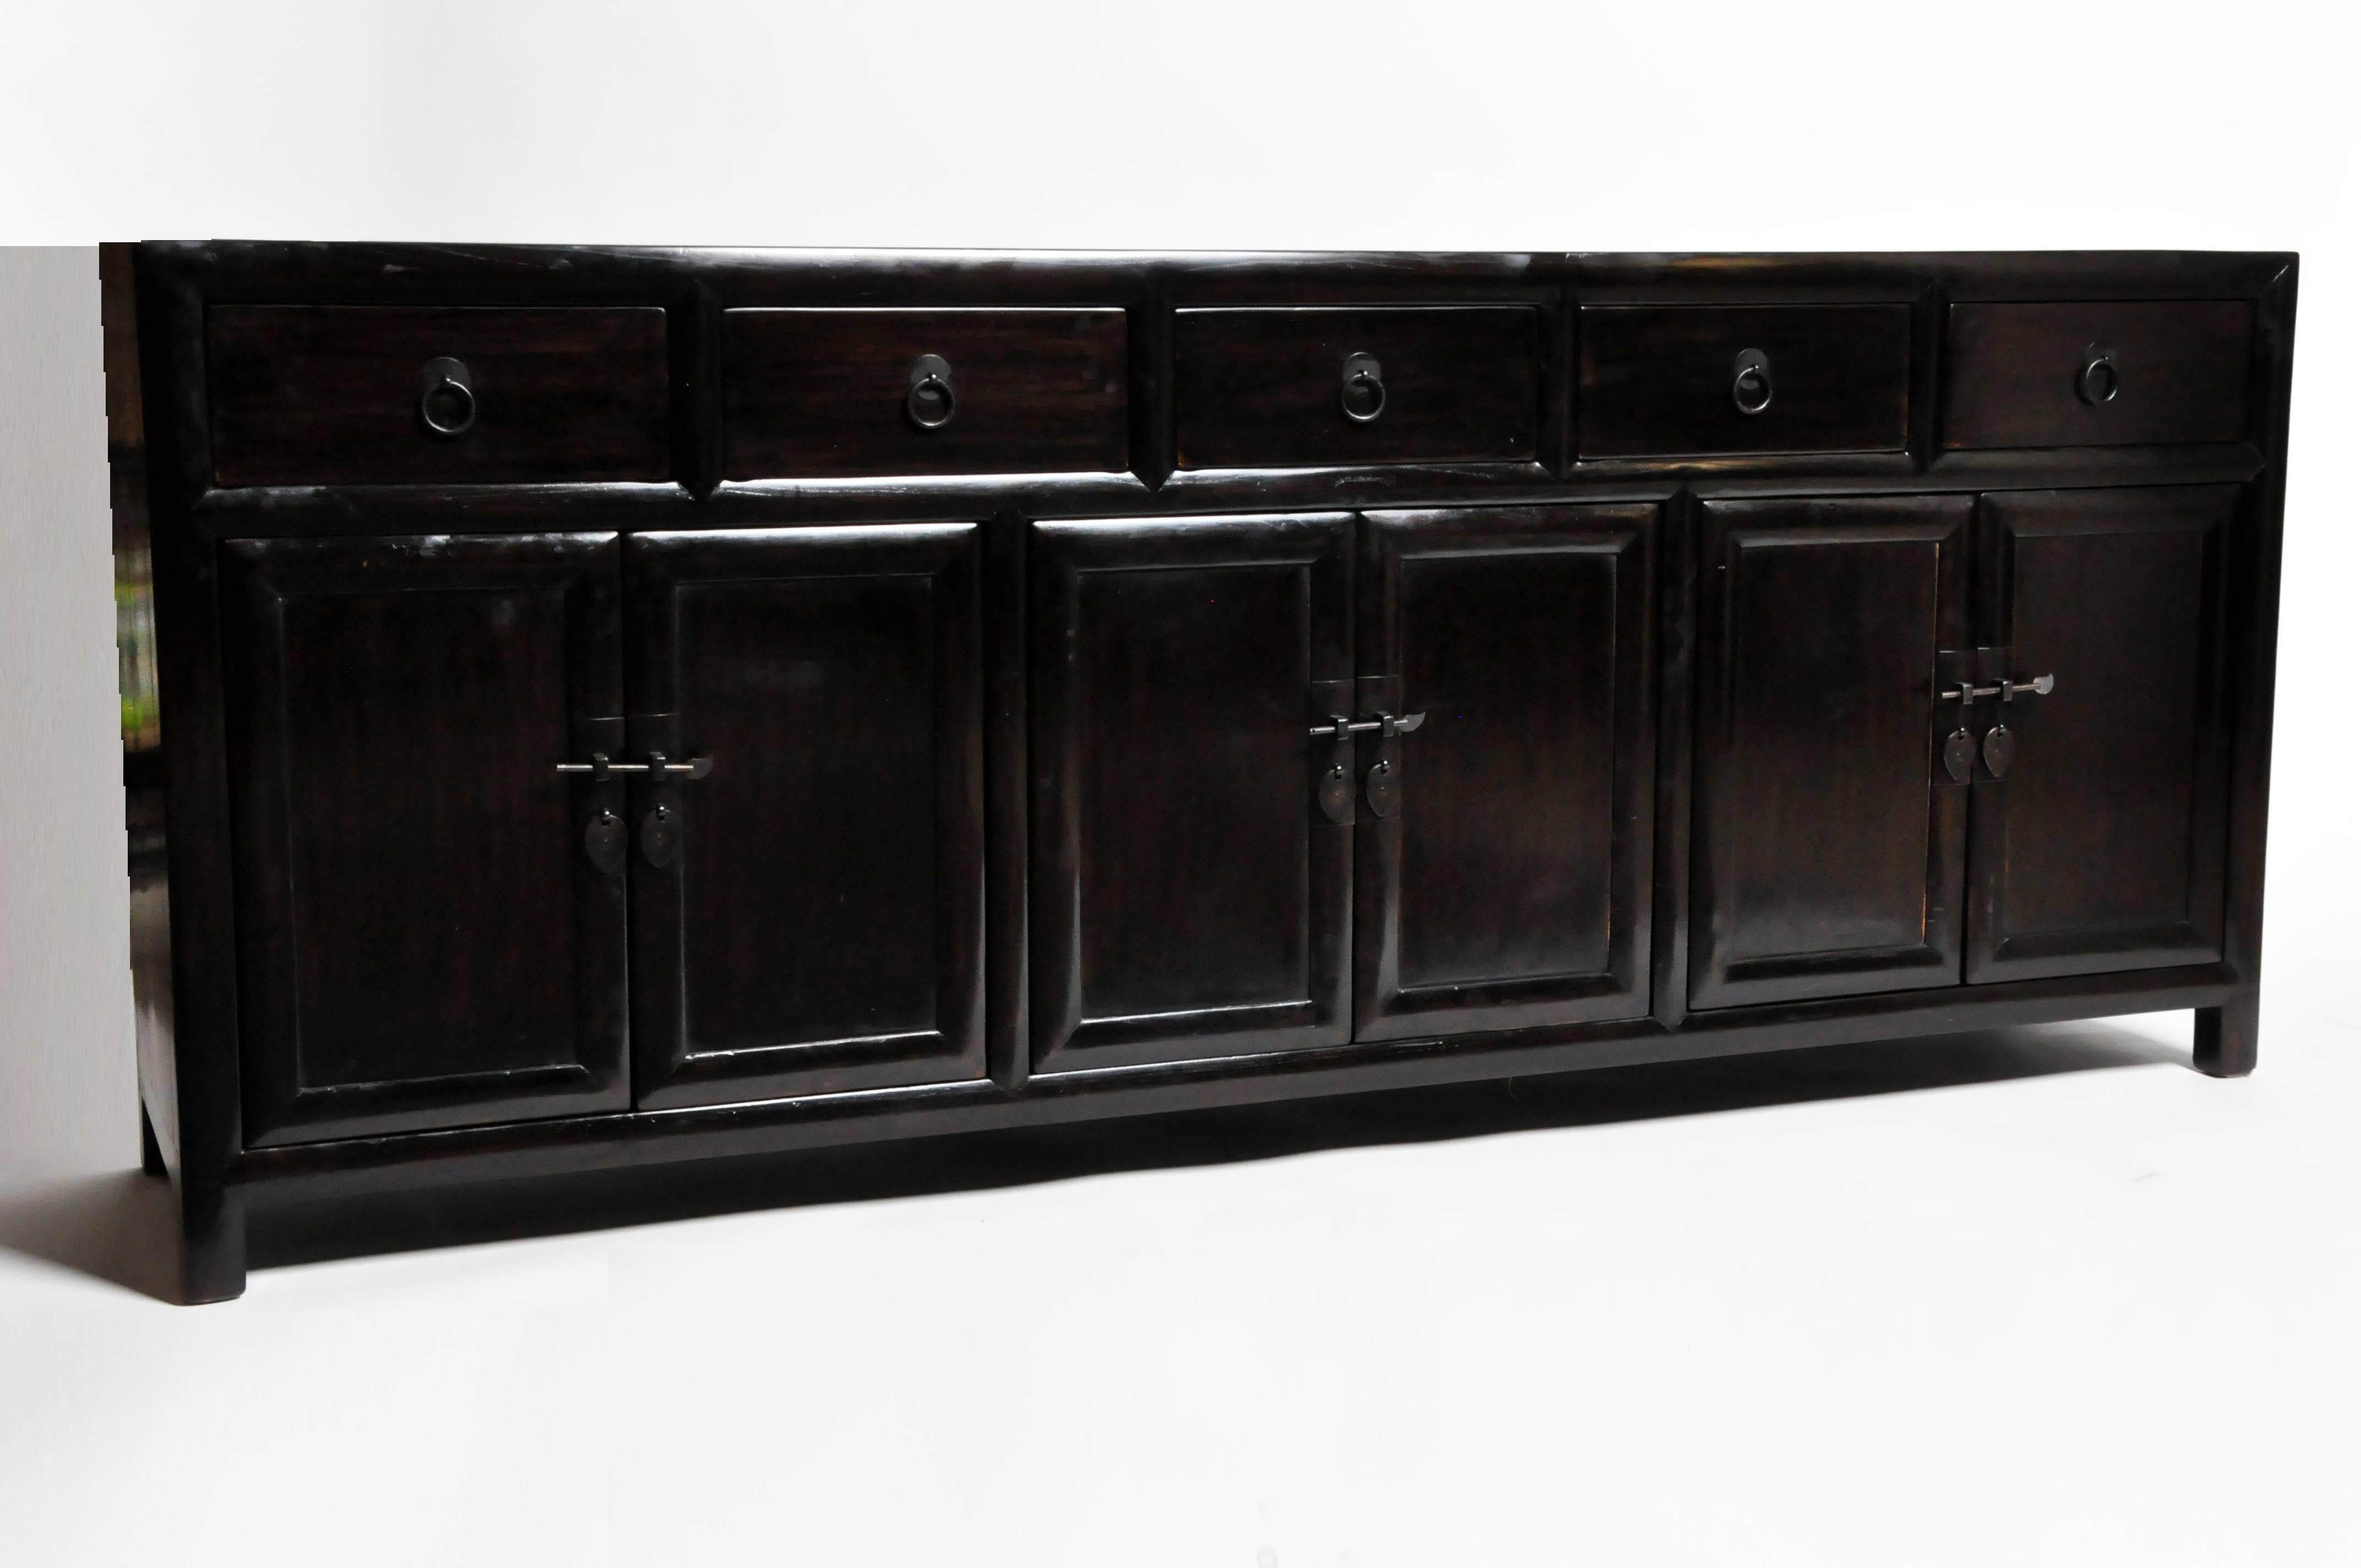 This five-drawer sideboard is from Hebei, China and was made from reclaimed elm wood, circa 1865. It features three shelves on the bottom and five drawers for ample storage. You can also customize it and make it your own. Wood, color, finish, and